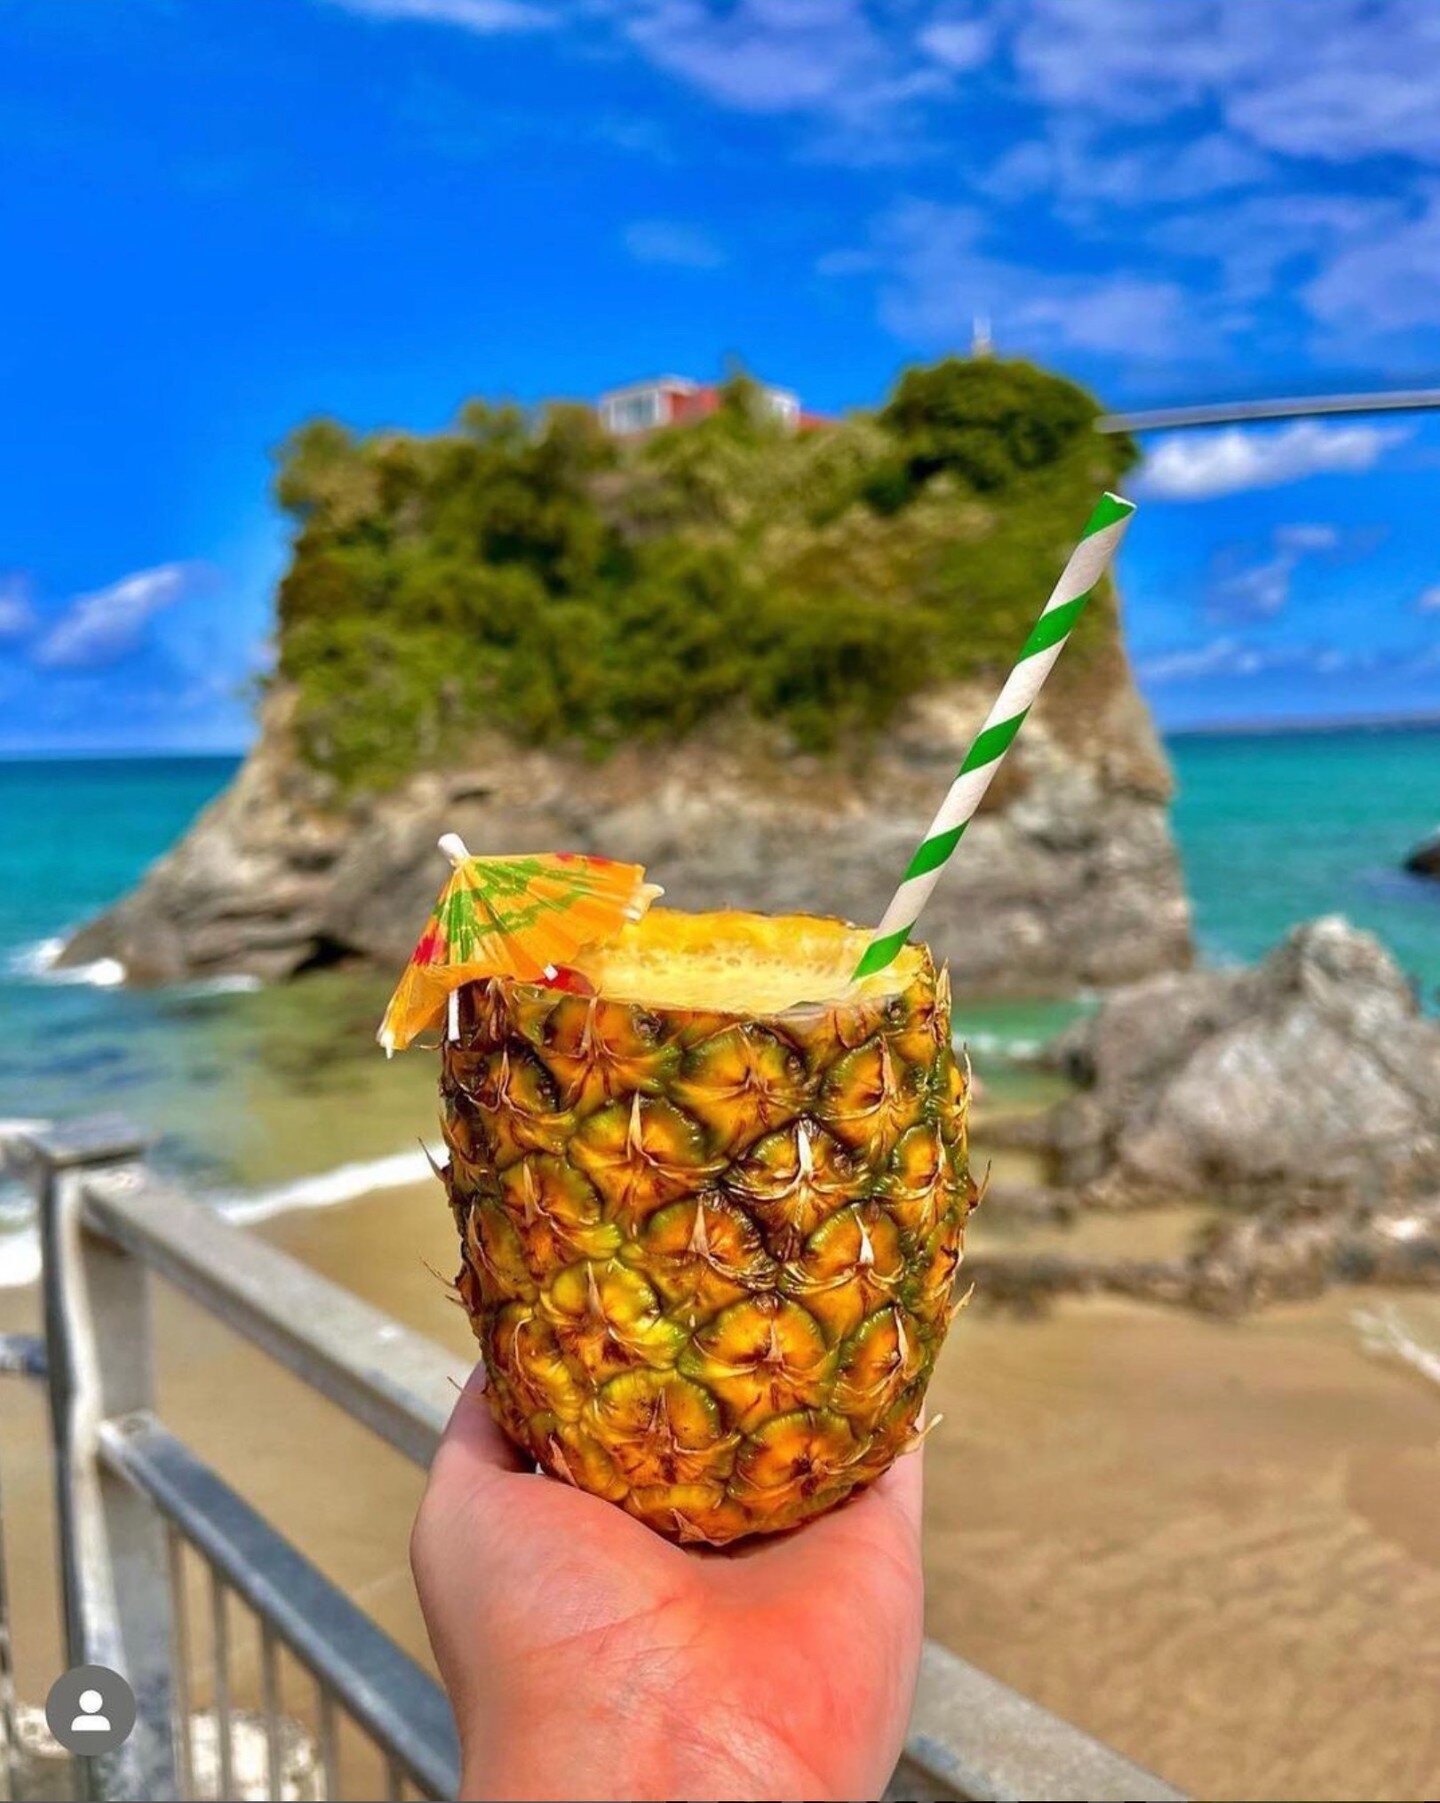 RIGHT ON TOWAN BEACH! 🌴🥥🍍✨You have to visit @thecoconutchy in Newquay before the summer is up! 

Transport yourself to the faraway shores with a bit of reggae, fresh coconuts, non-alcoholic pina coladas served in pineapples, fruit salads (served i